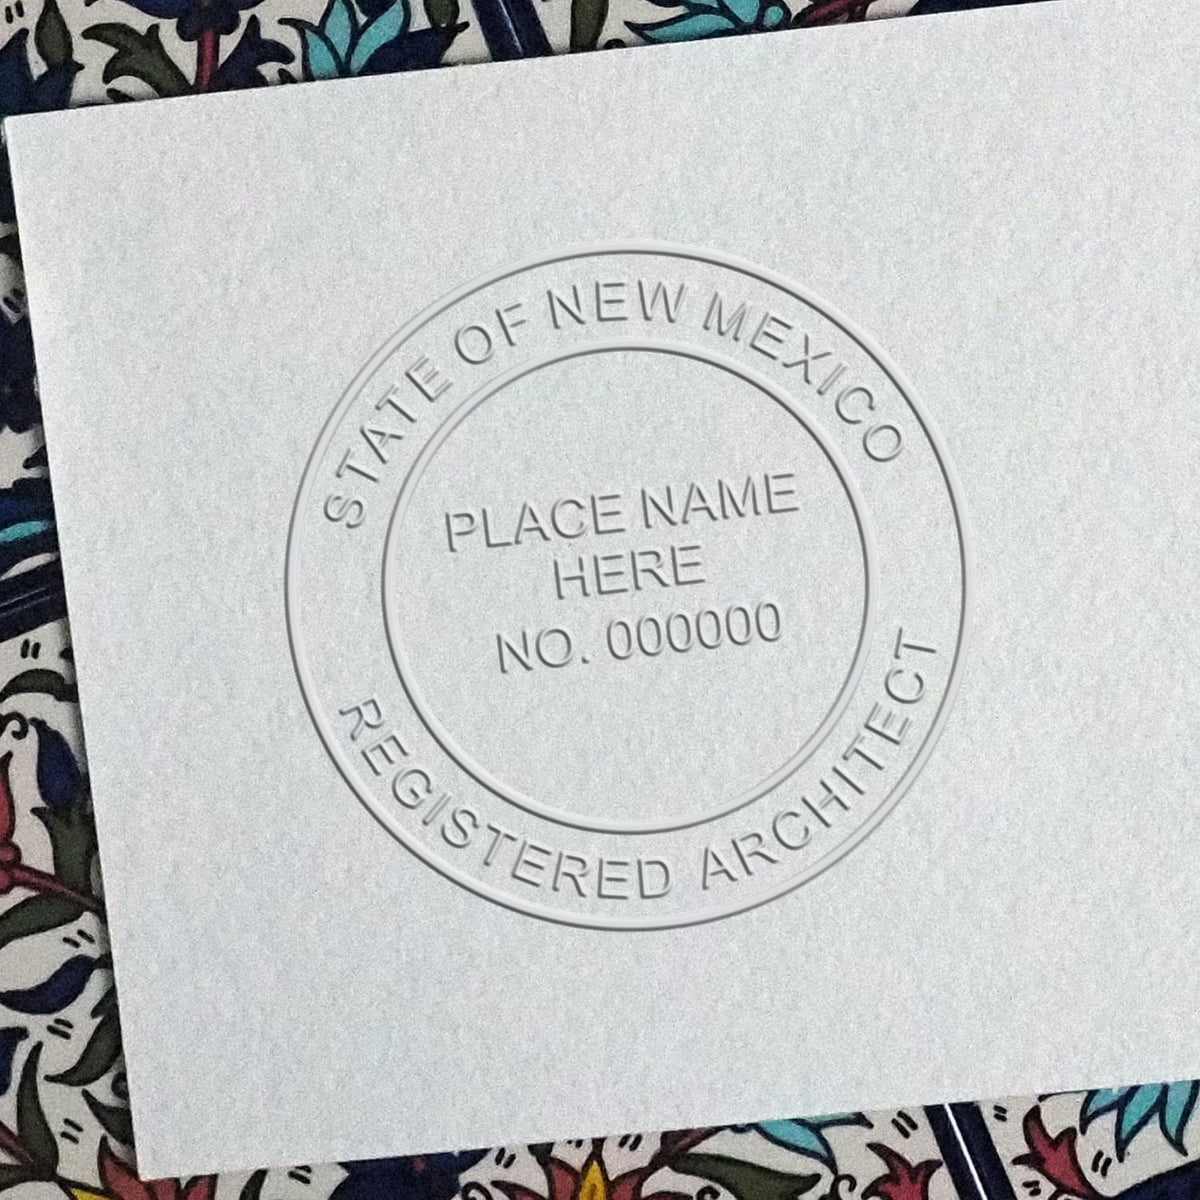 The State of New Mexico Long Reach Architectural Embossing Seal stamp impression comes to life with a crisp, detailed photo on paper - showcasing true professional quality.